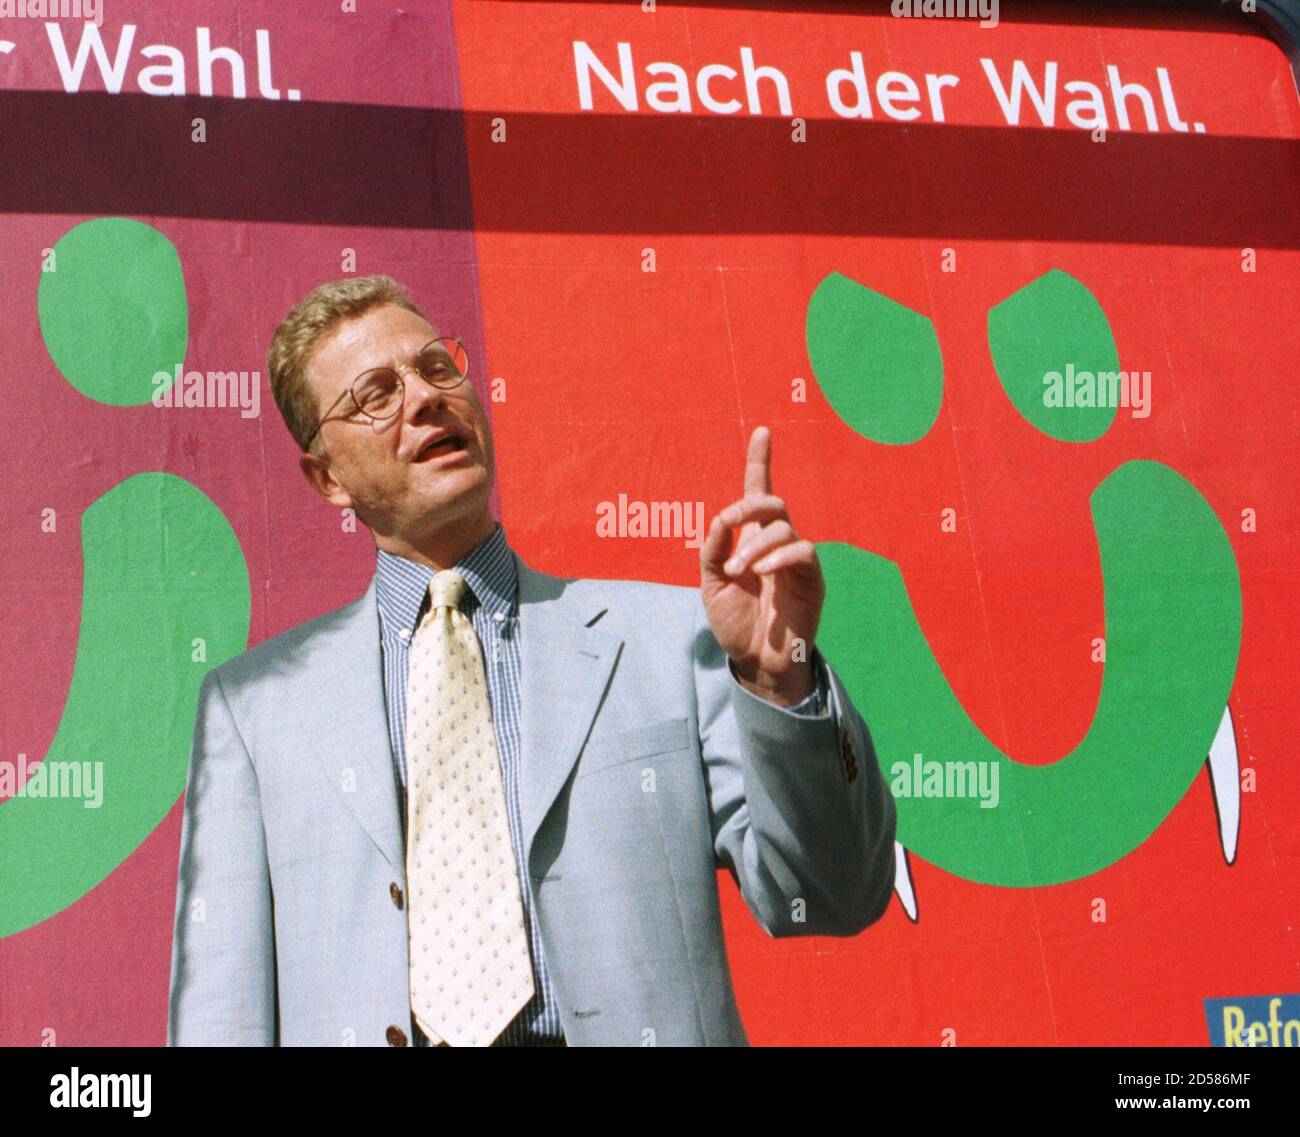 Guido Westerwelle, secretary general of the Free Liberal party FDP points at a new election campaign placard in Bonn June 8. The FDP' s new placard is a caricature of a campaign poster of the Greens party showing a smiling face with Dracula's teeth and reads "after the elections" ("nach der Wahl"). Germany will elect a new Chancellor in the September 27 general elections. Stock Photo